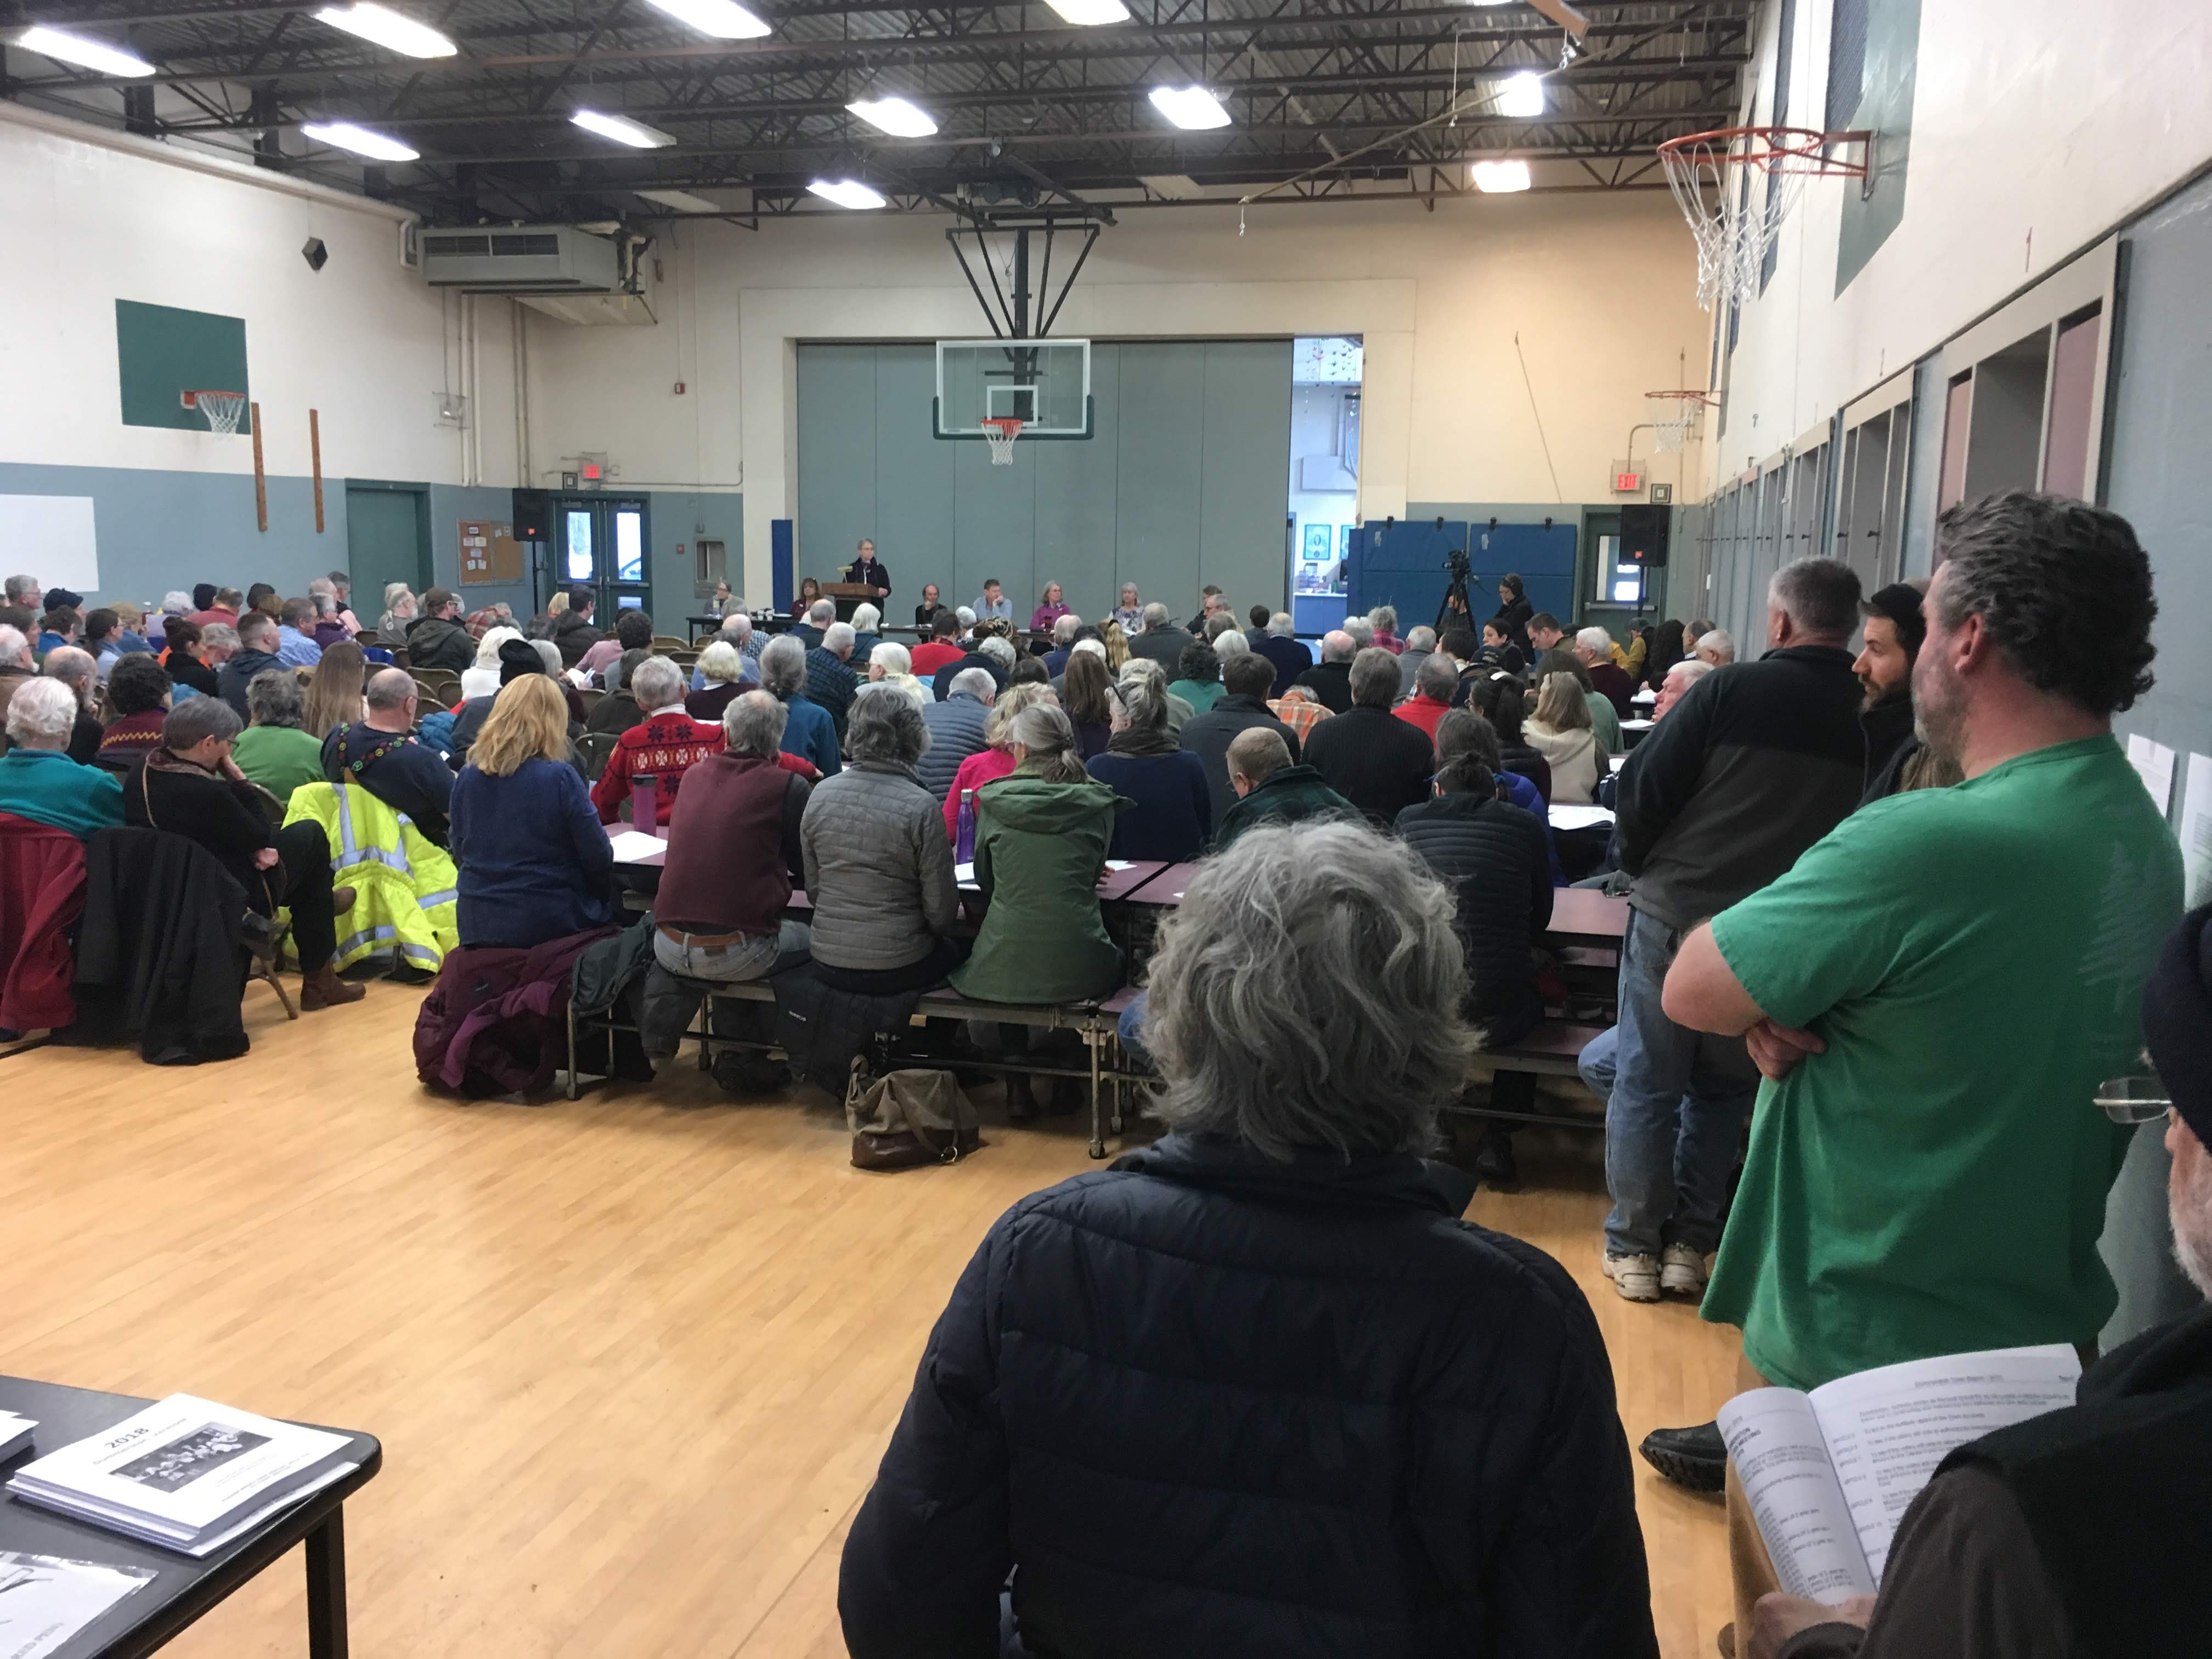 Voters Filled The Room At Dummerston Town Meeting On March 5th, 2019